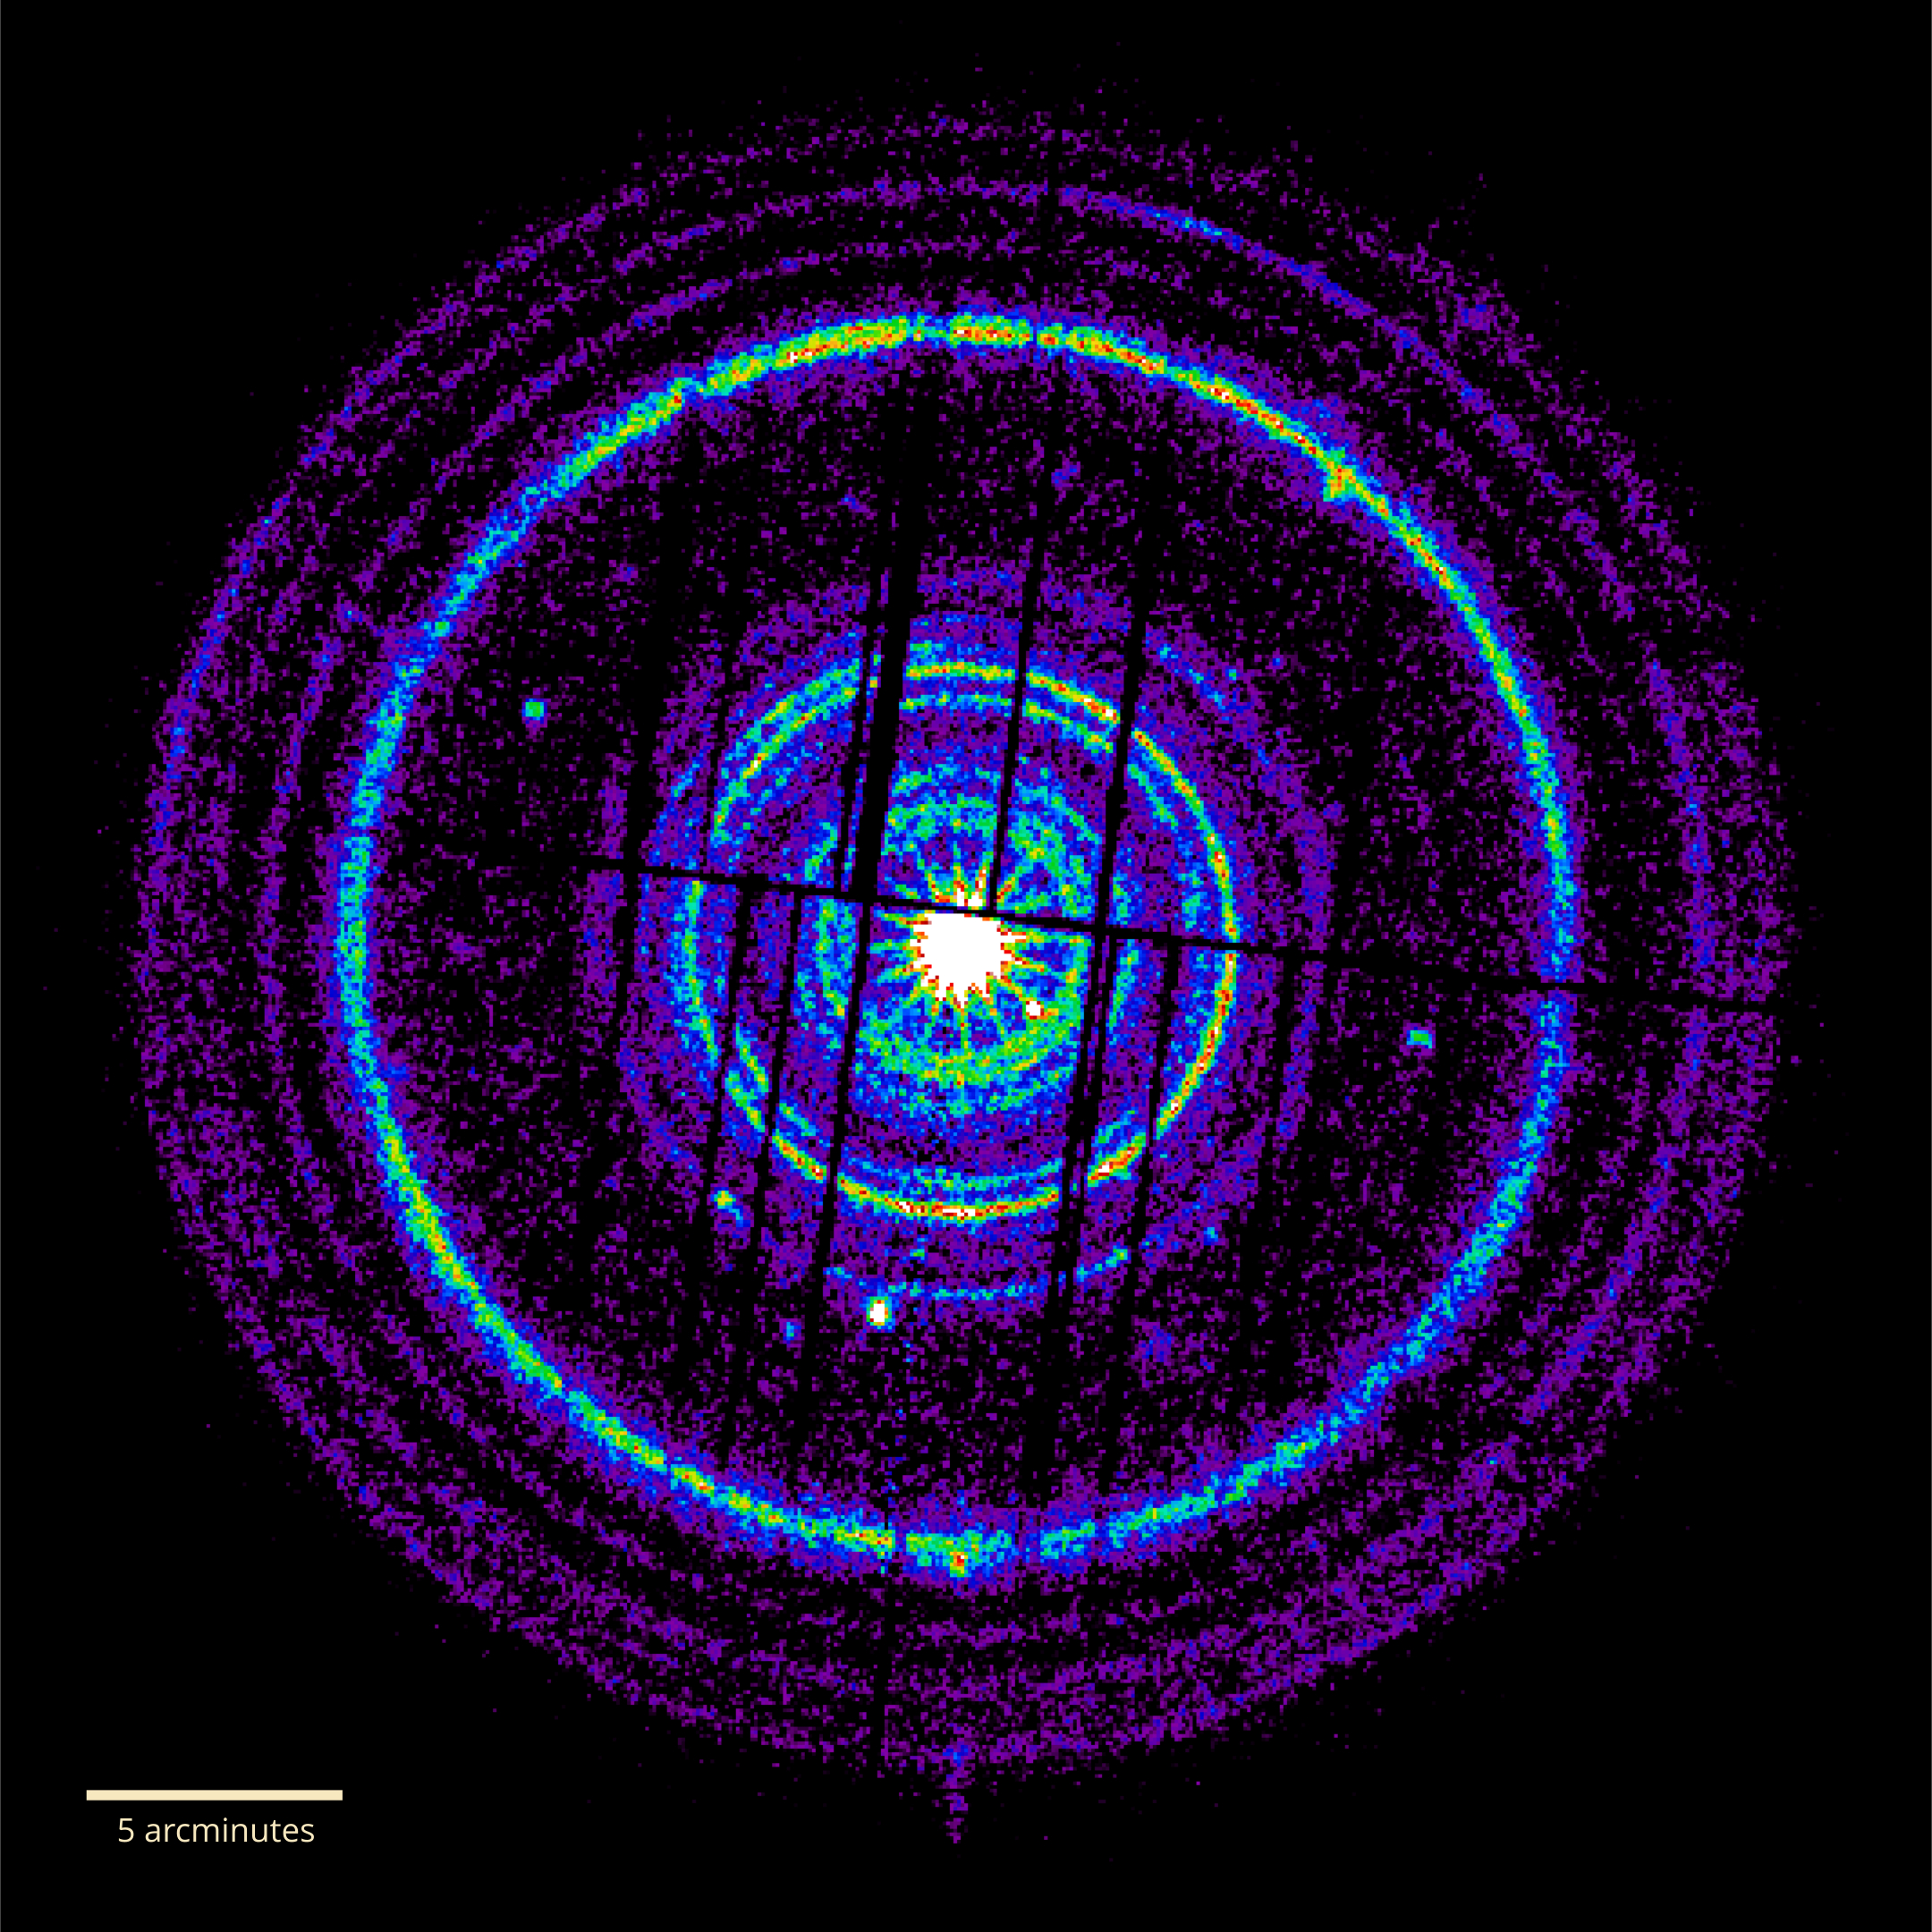 XMM-Newton images recorded 20 dust rings, 19 of which are shown here in arbitrary colors. This composite merges observations made two and five days after GRB 221009A erupted. Dark stripes indicate gaps between the detectors. A detailed analysis shows that the widest ring visible here, comparable to the apparent size of a full moon, came from dust clouds located about 1,300 light-years away. The innermost ring arose from dust at a distance of 61,000 light-years  on the other side of our galaxy. GRB221009A is only the seventh gamma-ray burst to display X-ray rings, and it triples the number previously seen around one.Credit: ESA/XMM-Newton/M. Rigoselli (INAF)